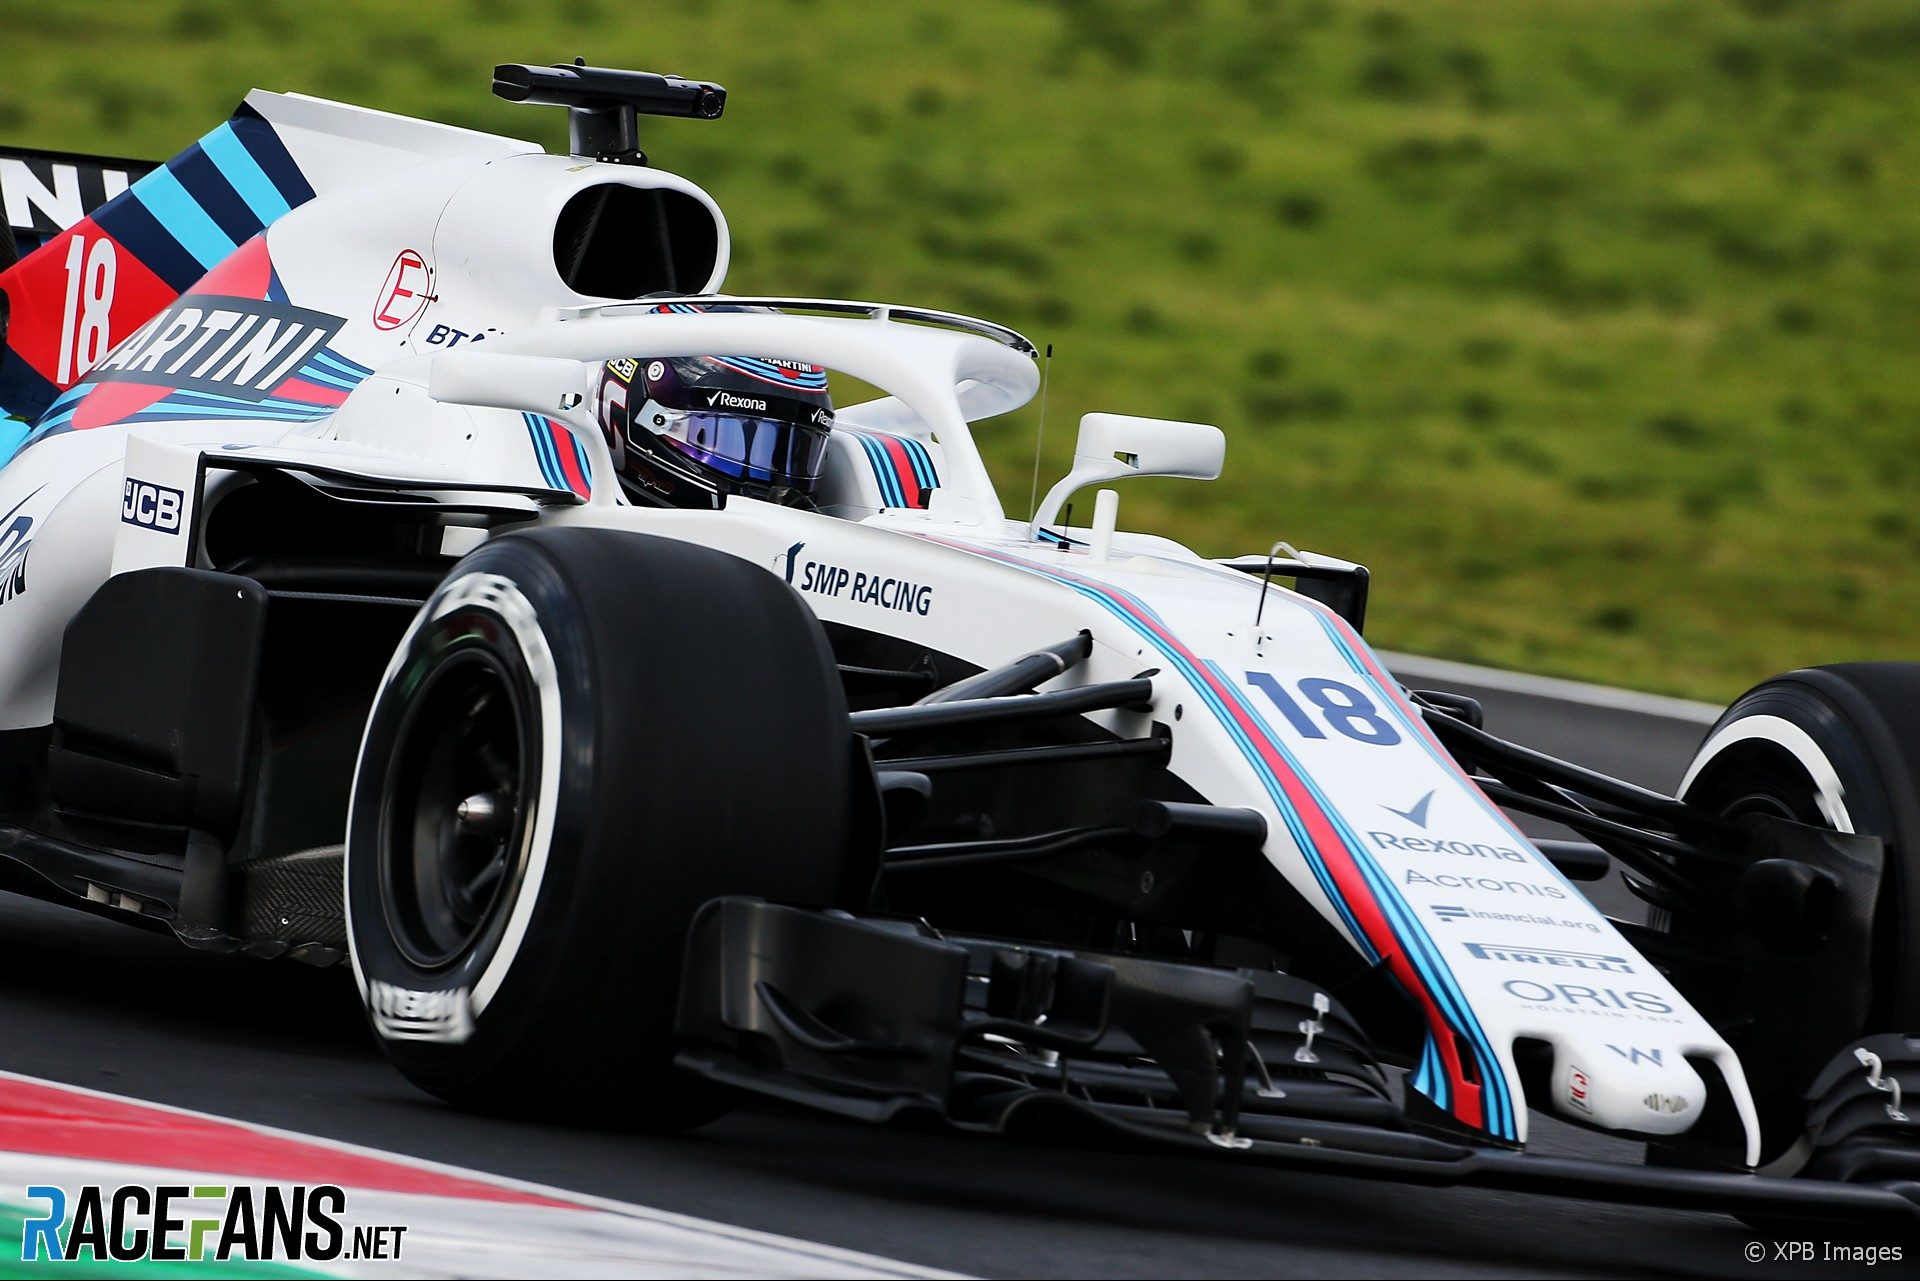 Williams knew it was in trouble on lap one in testing – Lowe